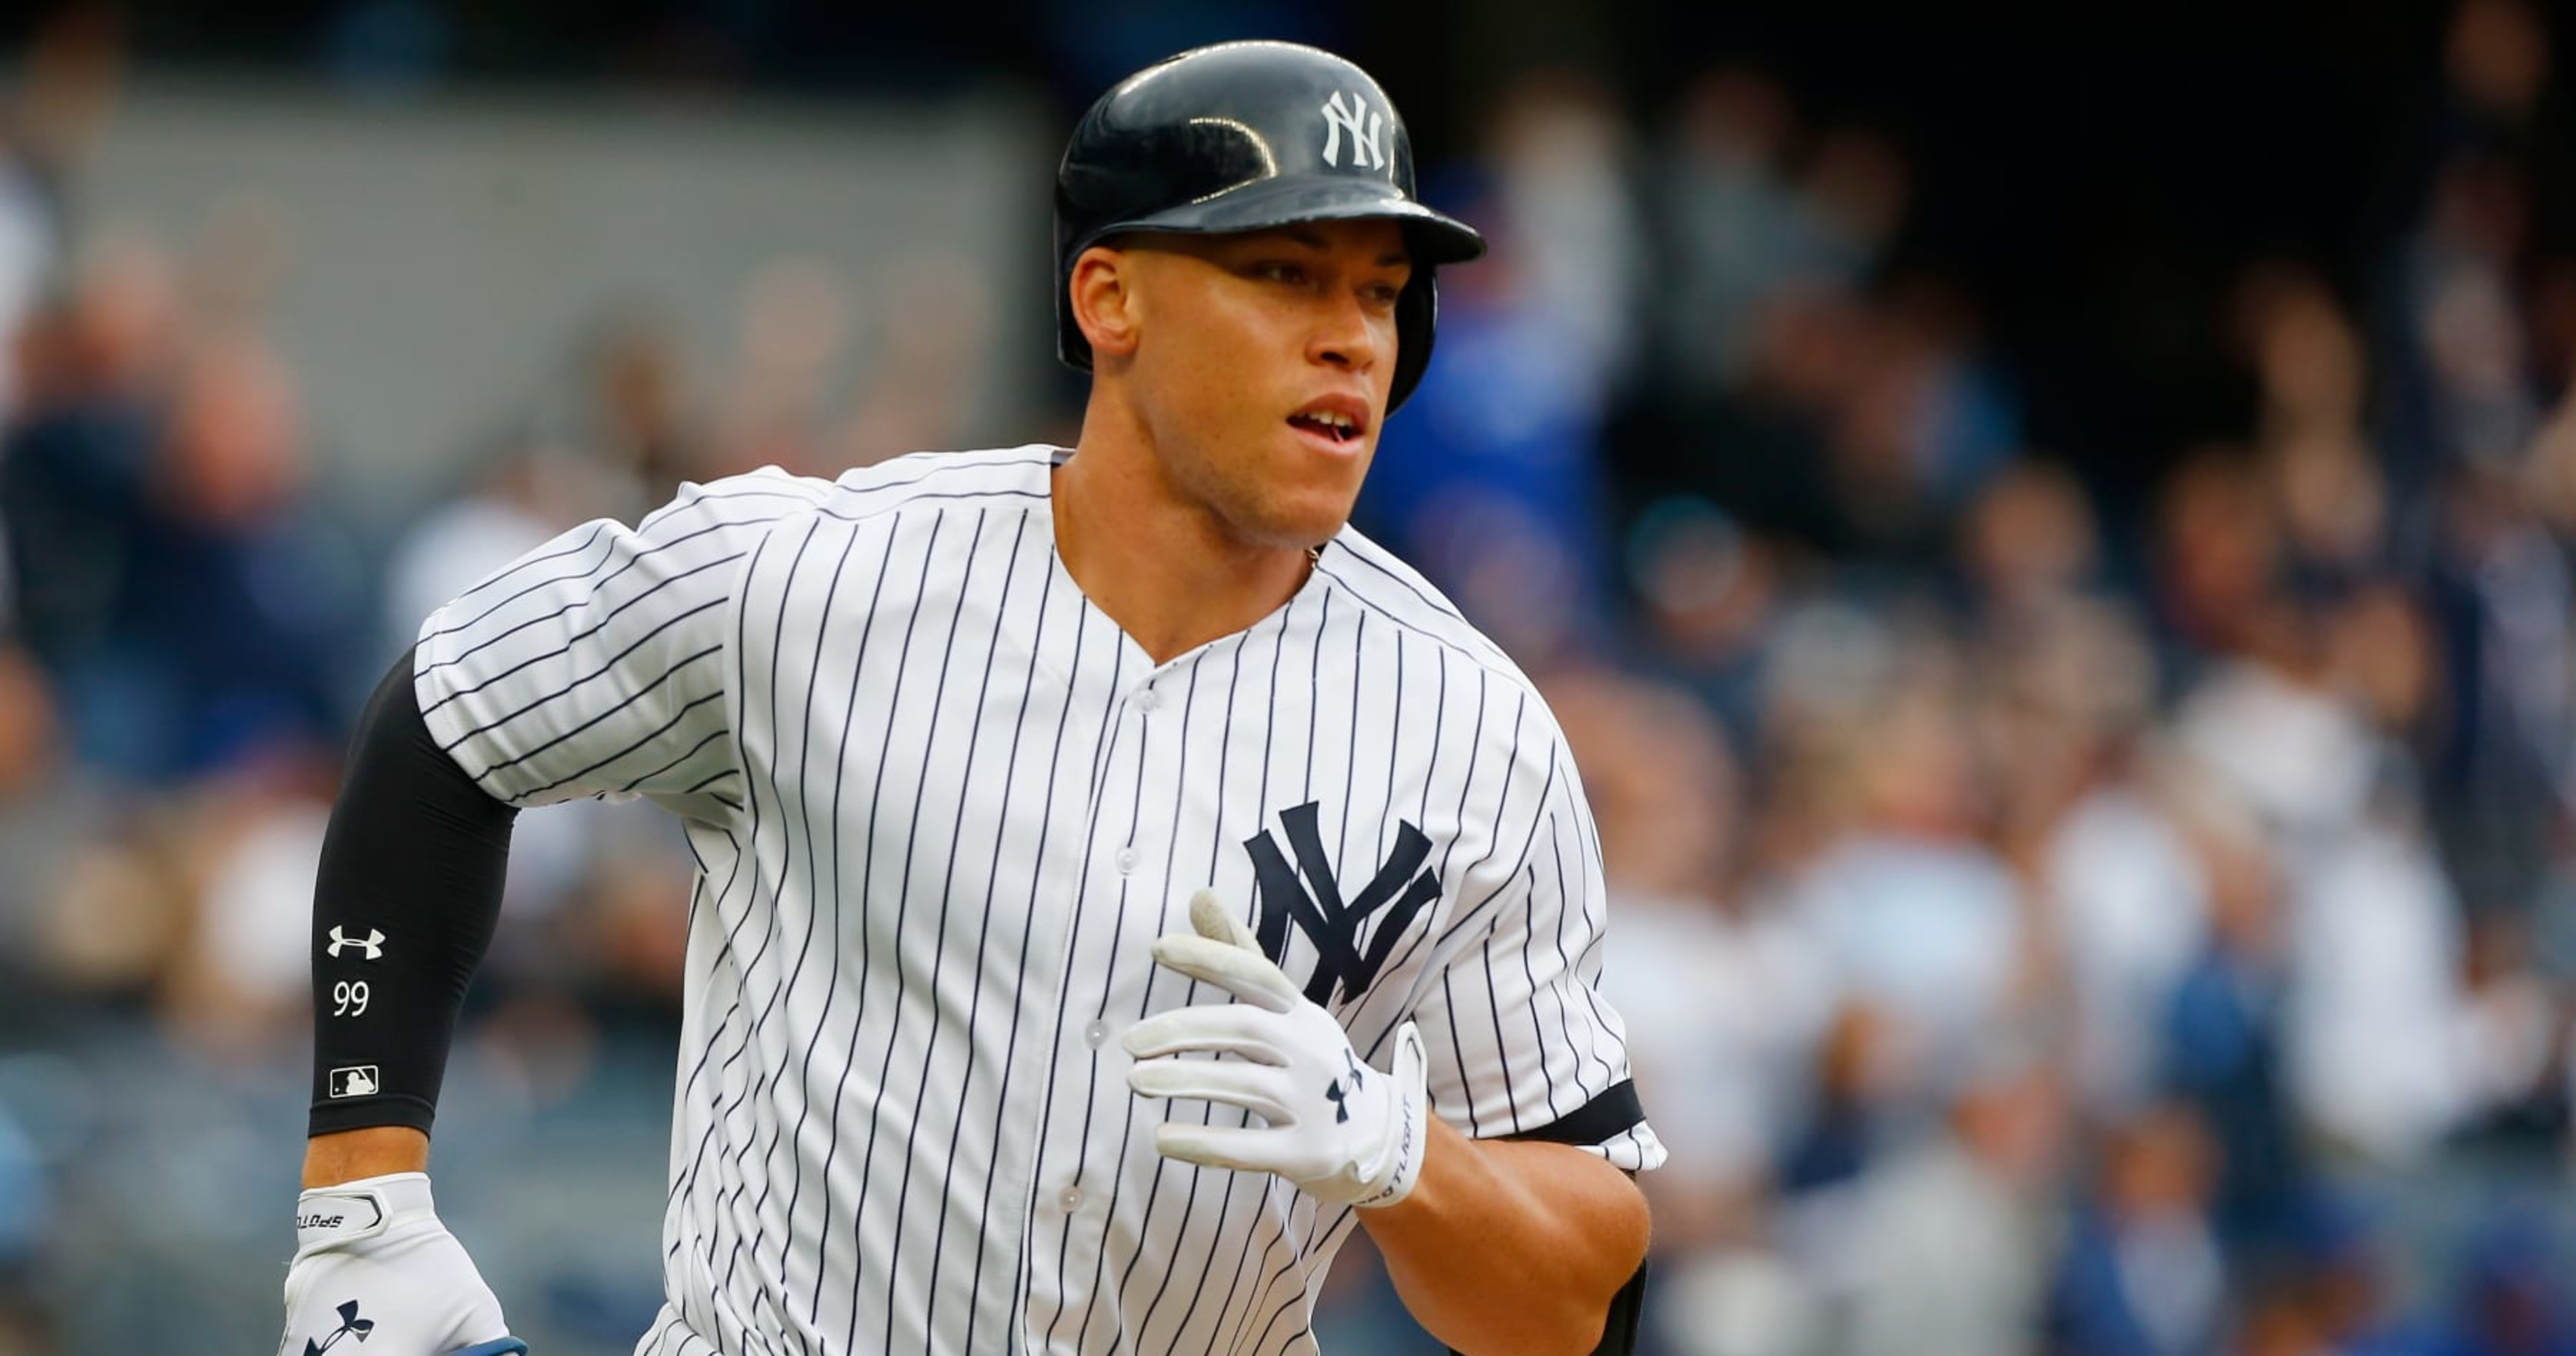 Aaron Judge's 60th HR Ball Traded for Meet-and-Greet, 4 Signed